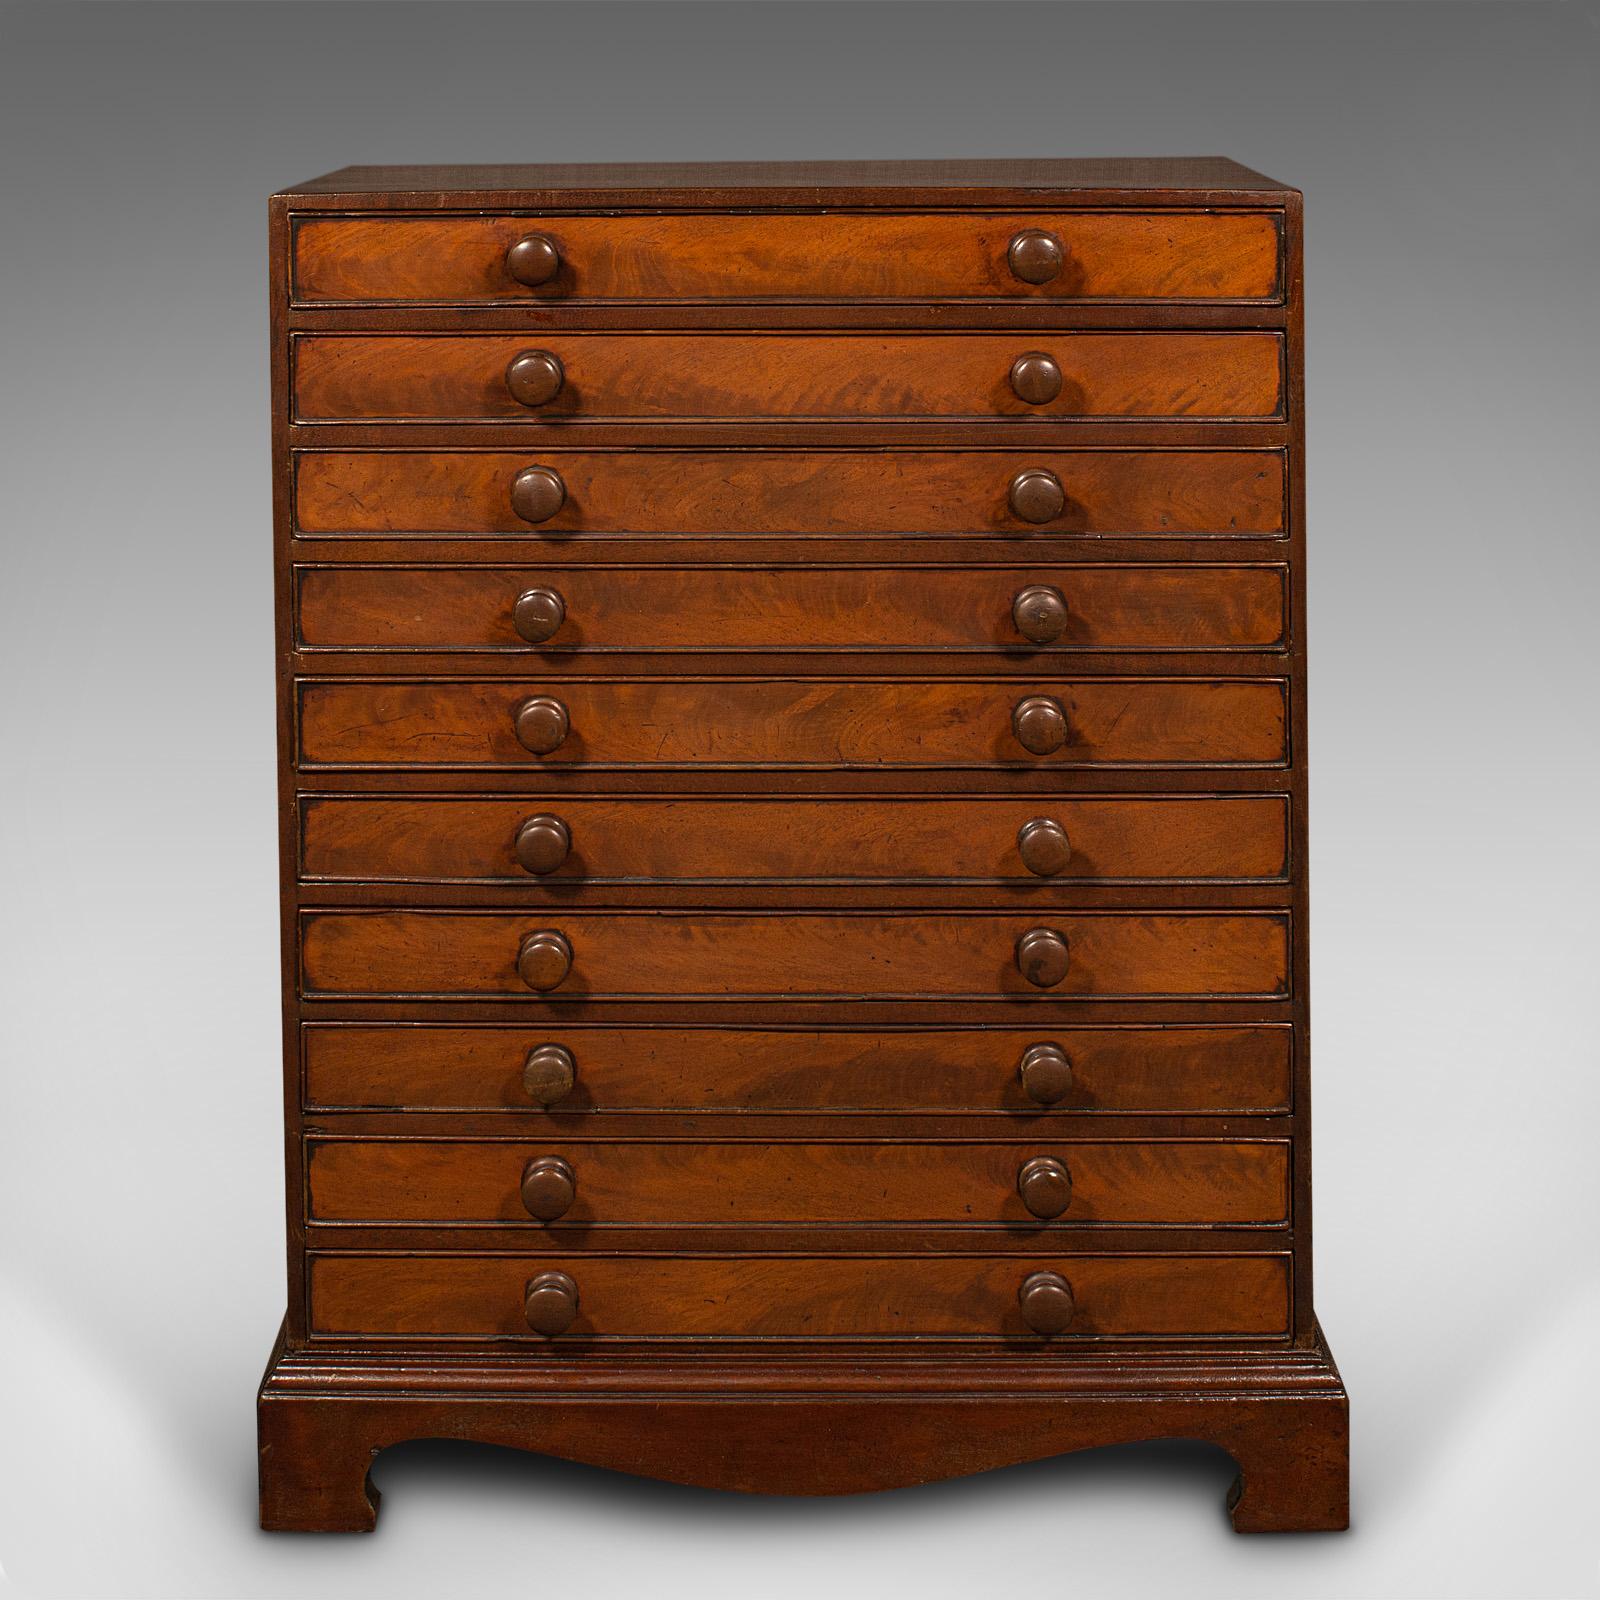 British Antique Specimen Chest, English, Collector's Chest of Drawers, Georgian, C.1800 For Sale